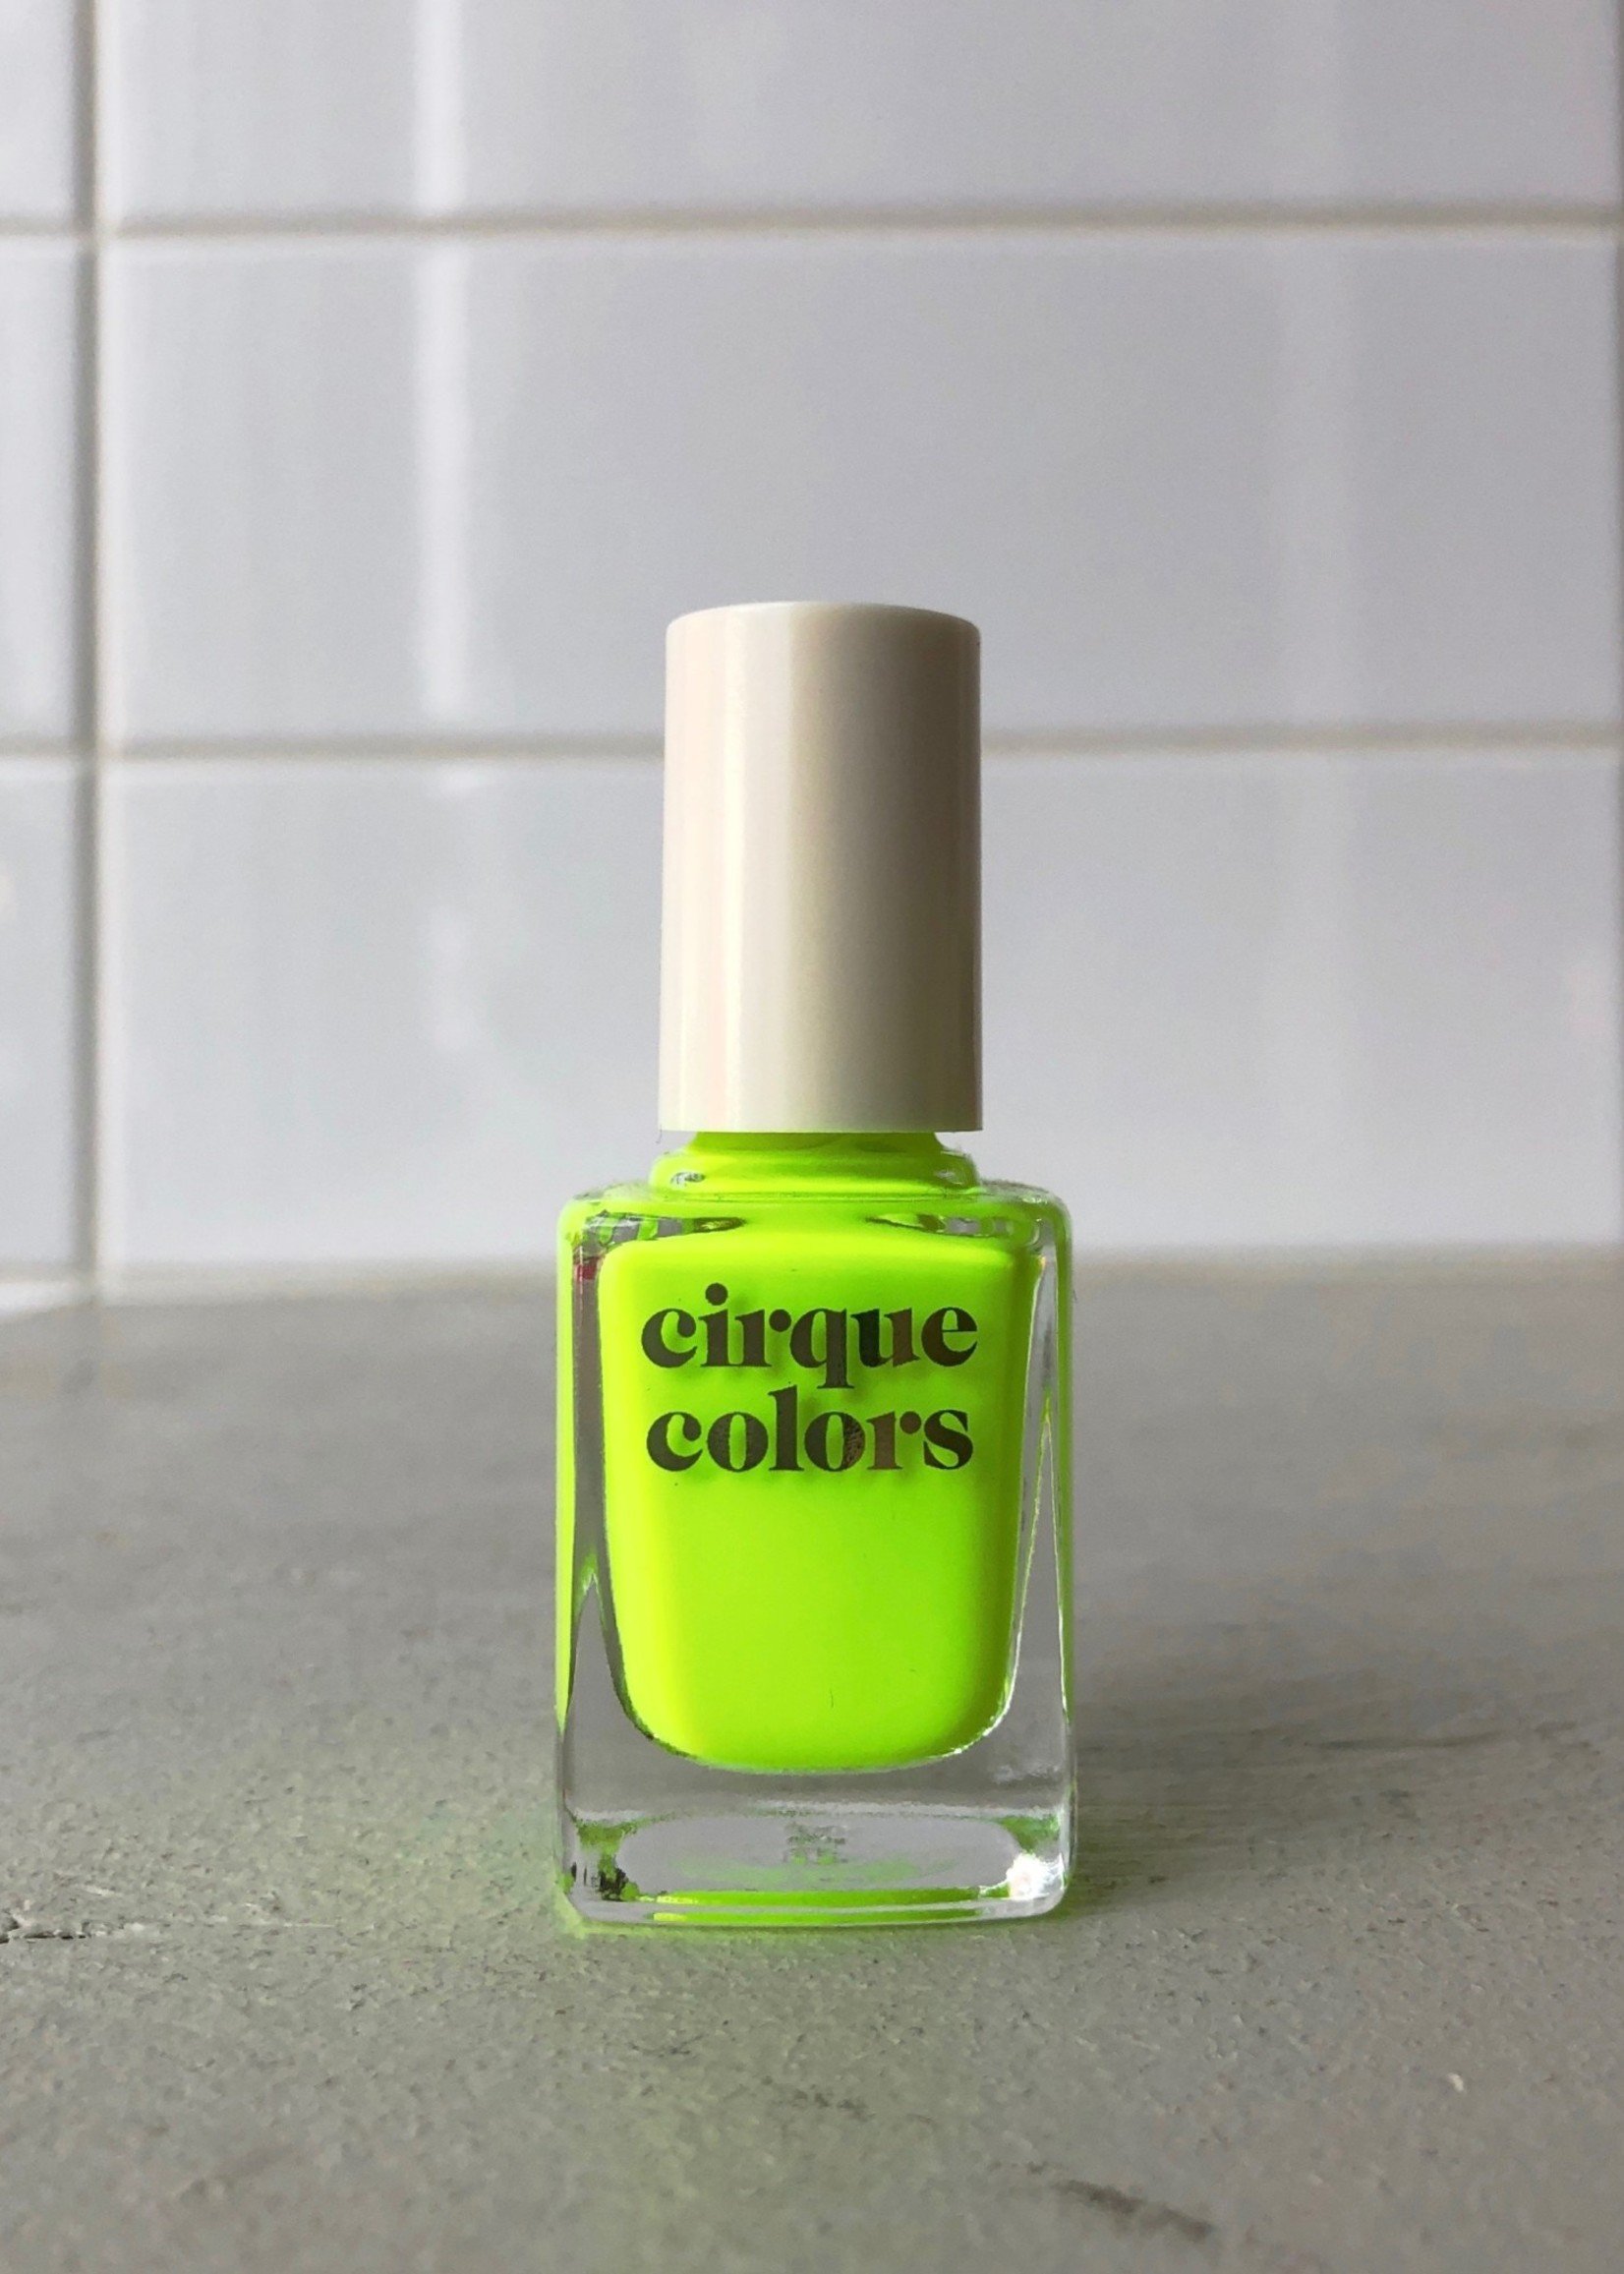 Cirque Colors Vice Nail Polishes by Cirque Colors